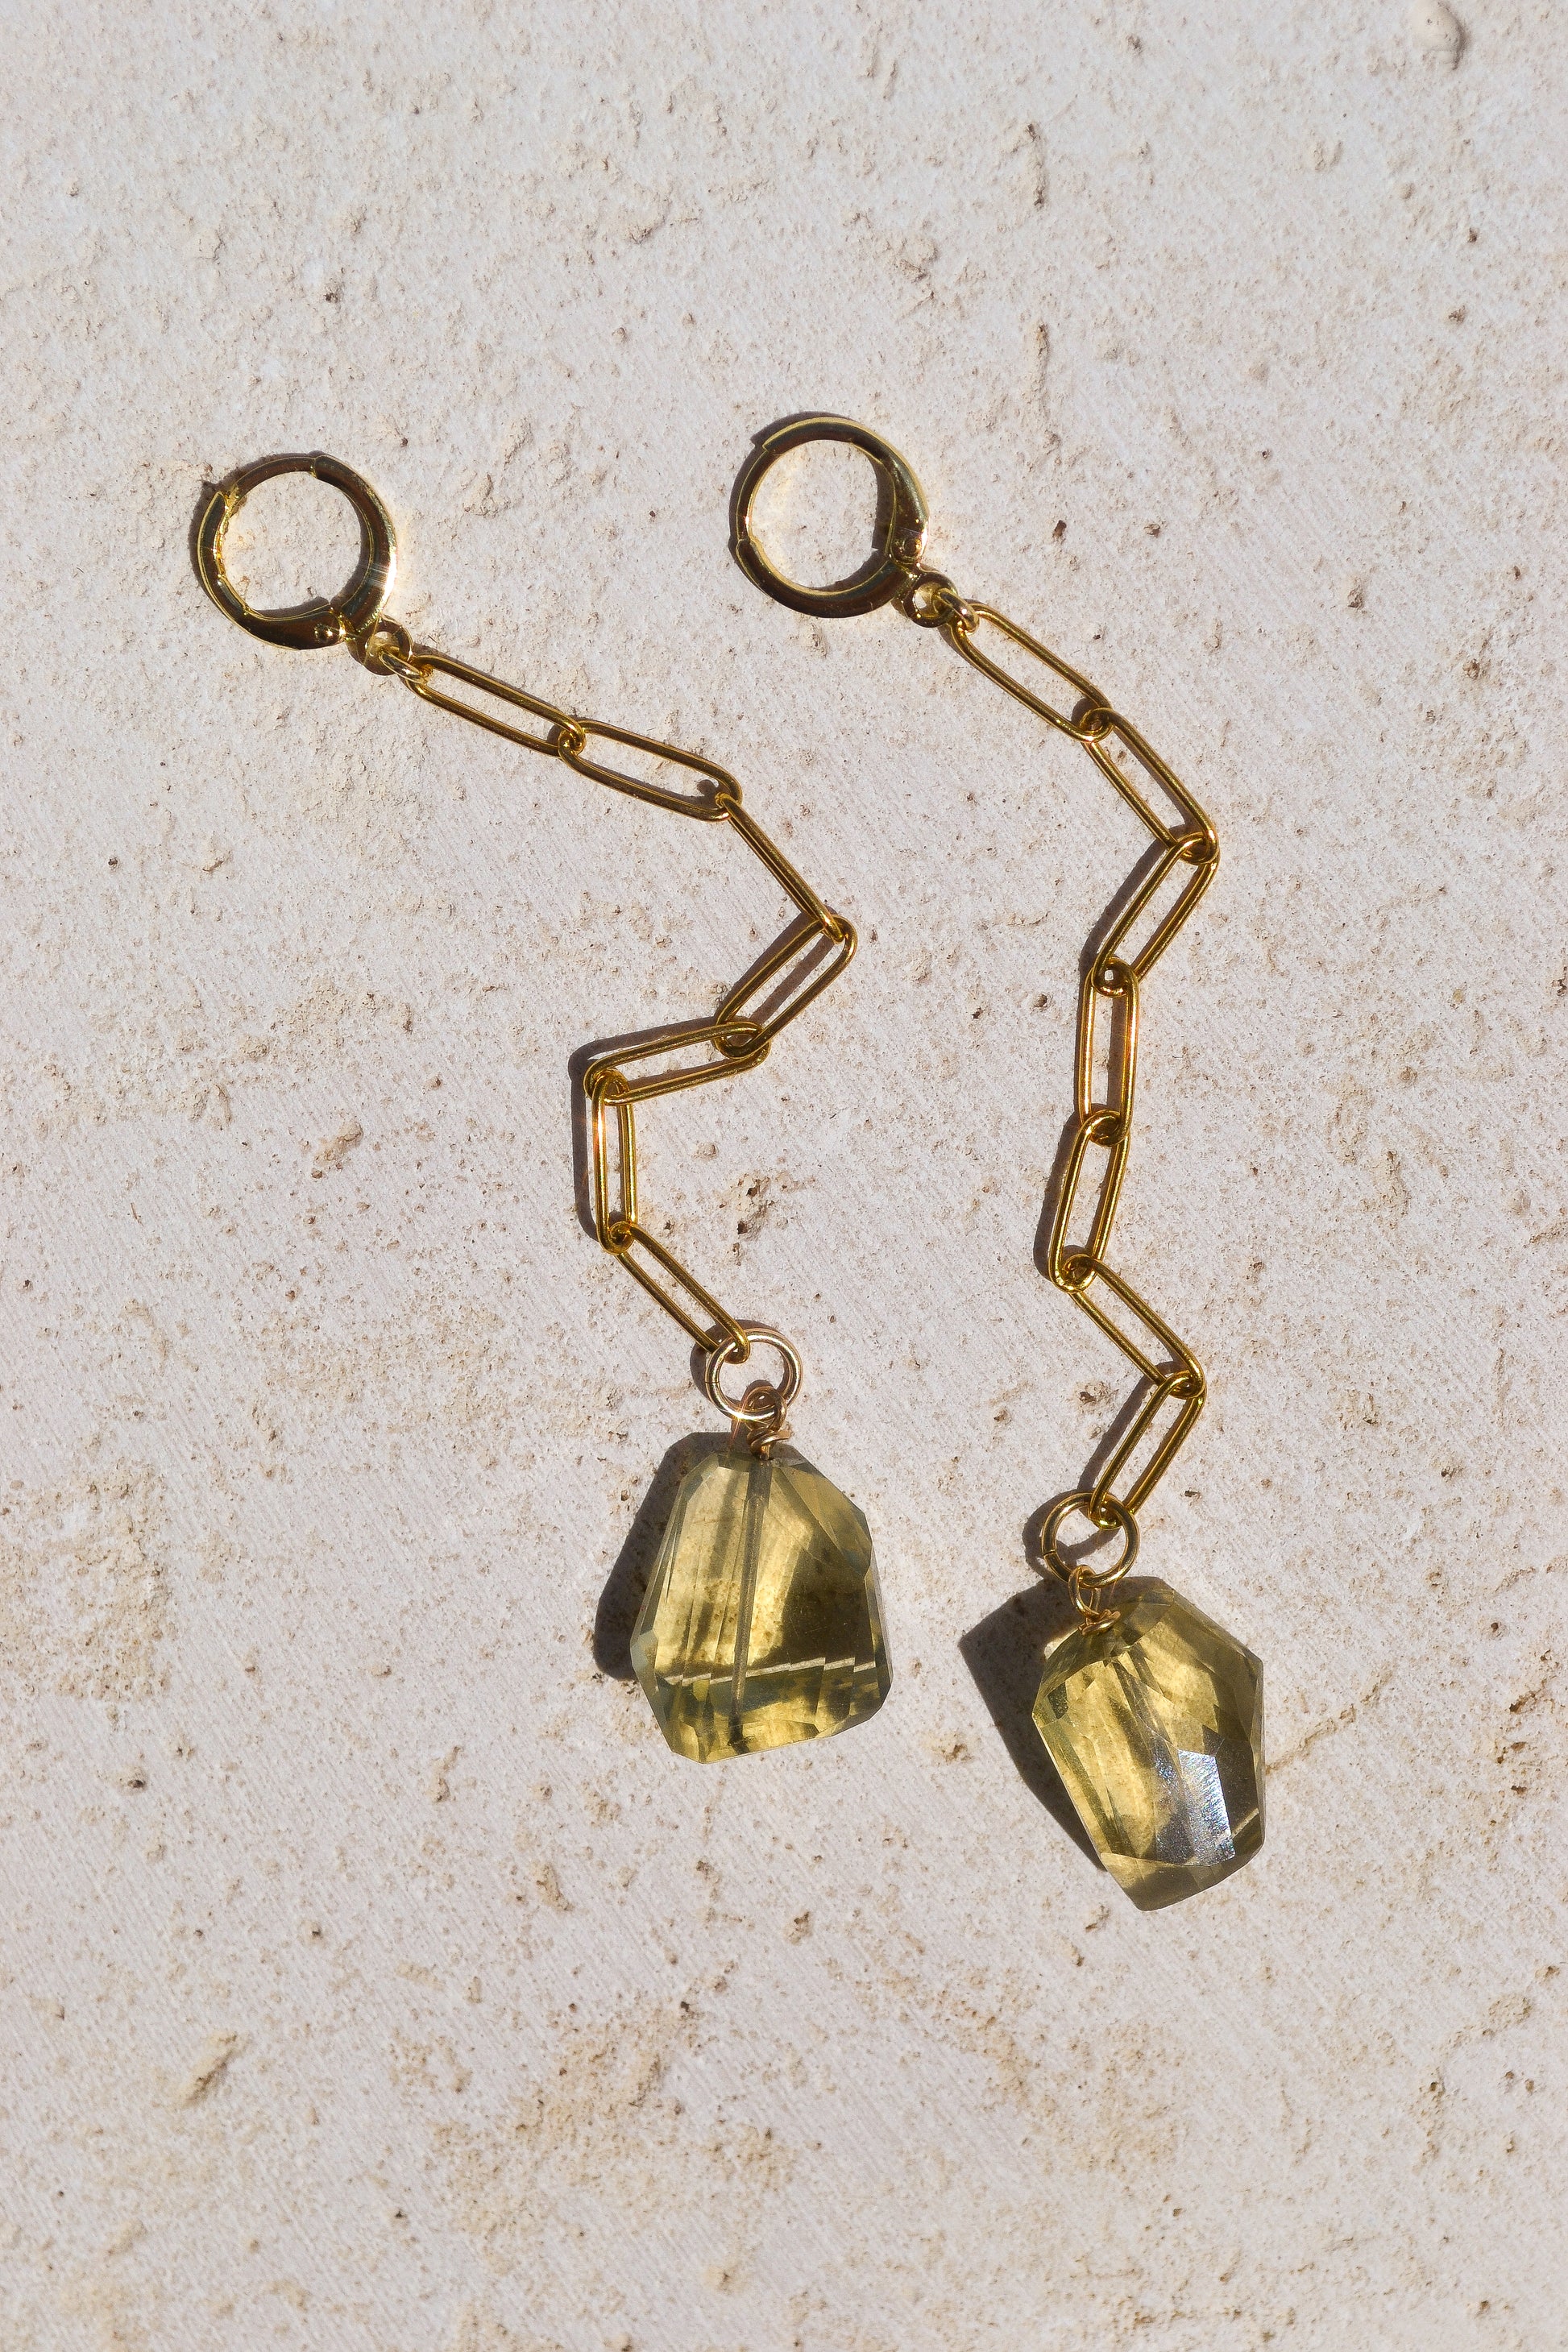 Chunky lemon quartz drop earrings on gold fill paper clip chains on hinge back hoops. Designed in California by Carrie Marill and made by hand in her SoCal studio.